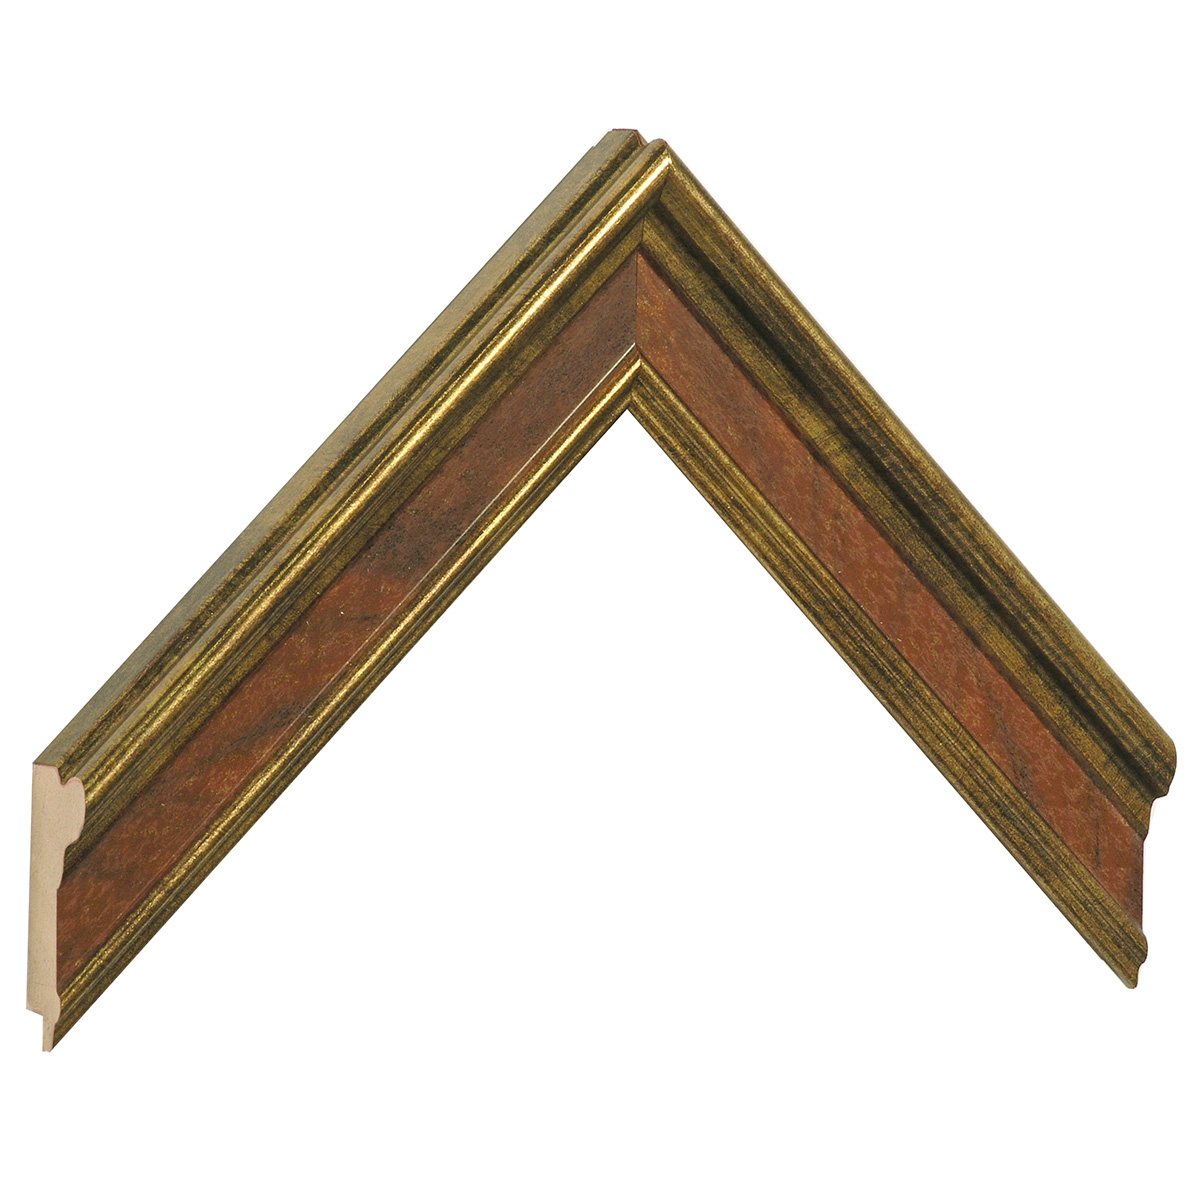 Moulding finger-jointed pine Width 34mm - Gold red band - Sample